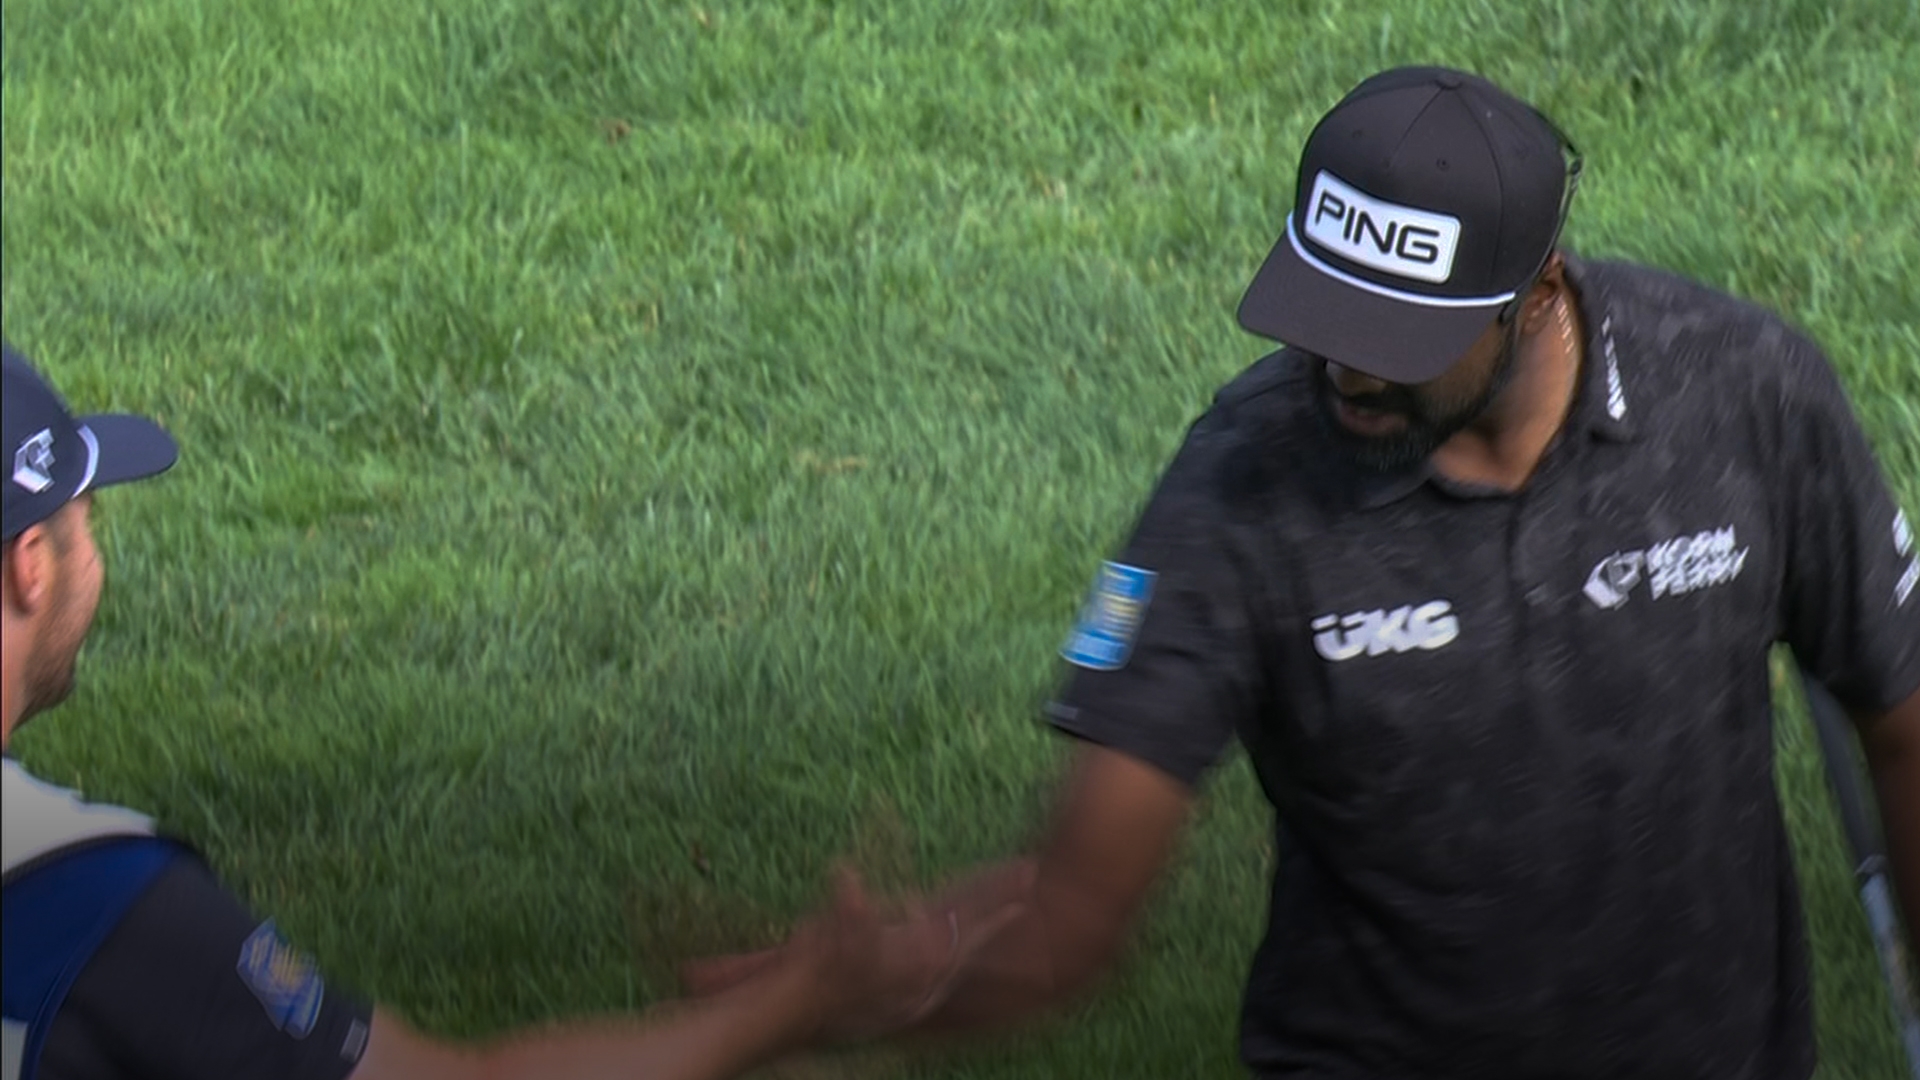 Sahith Theegala ties the lead with a beautiful chip-in